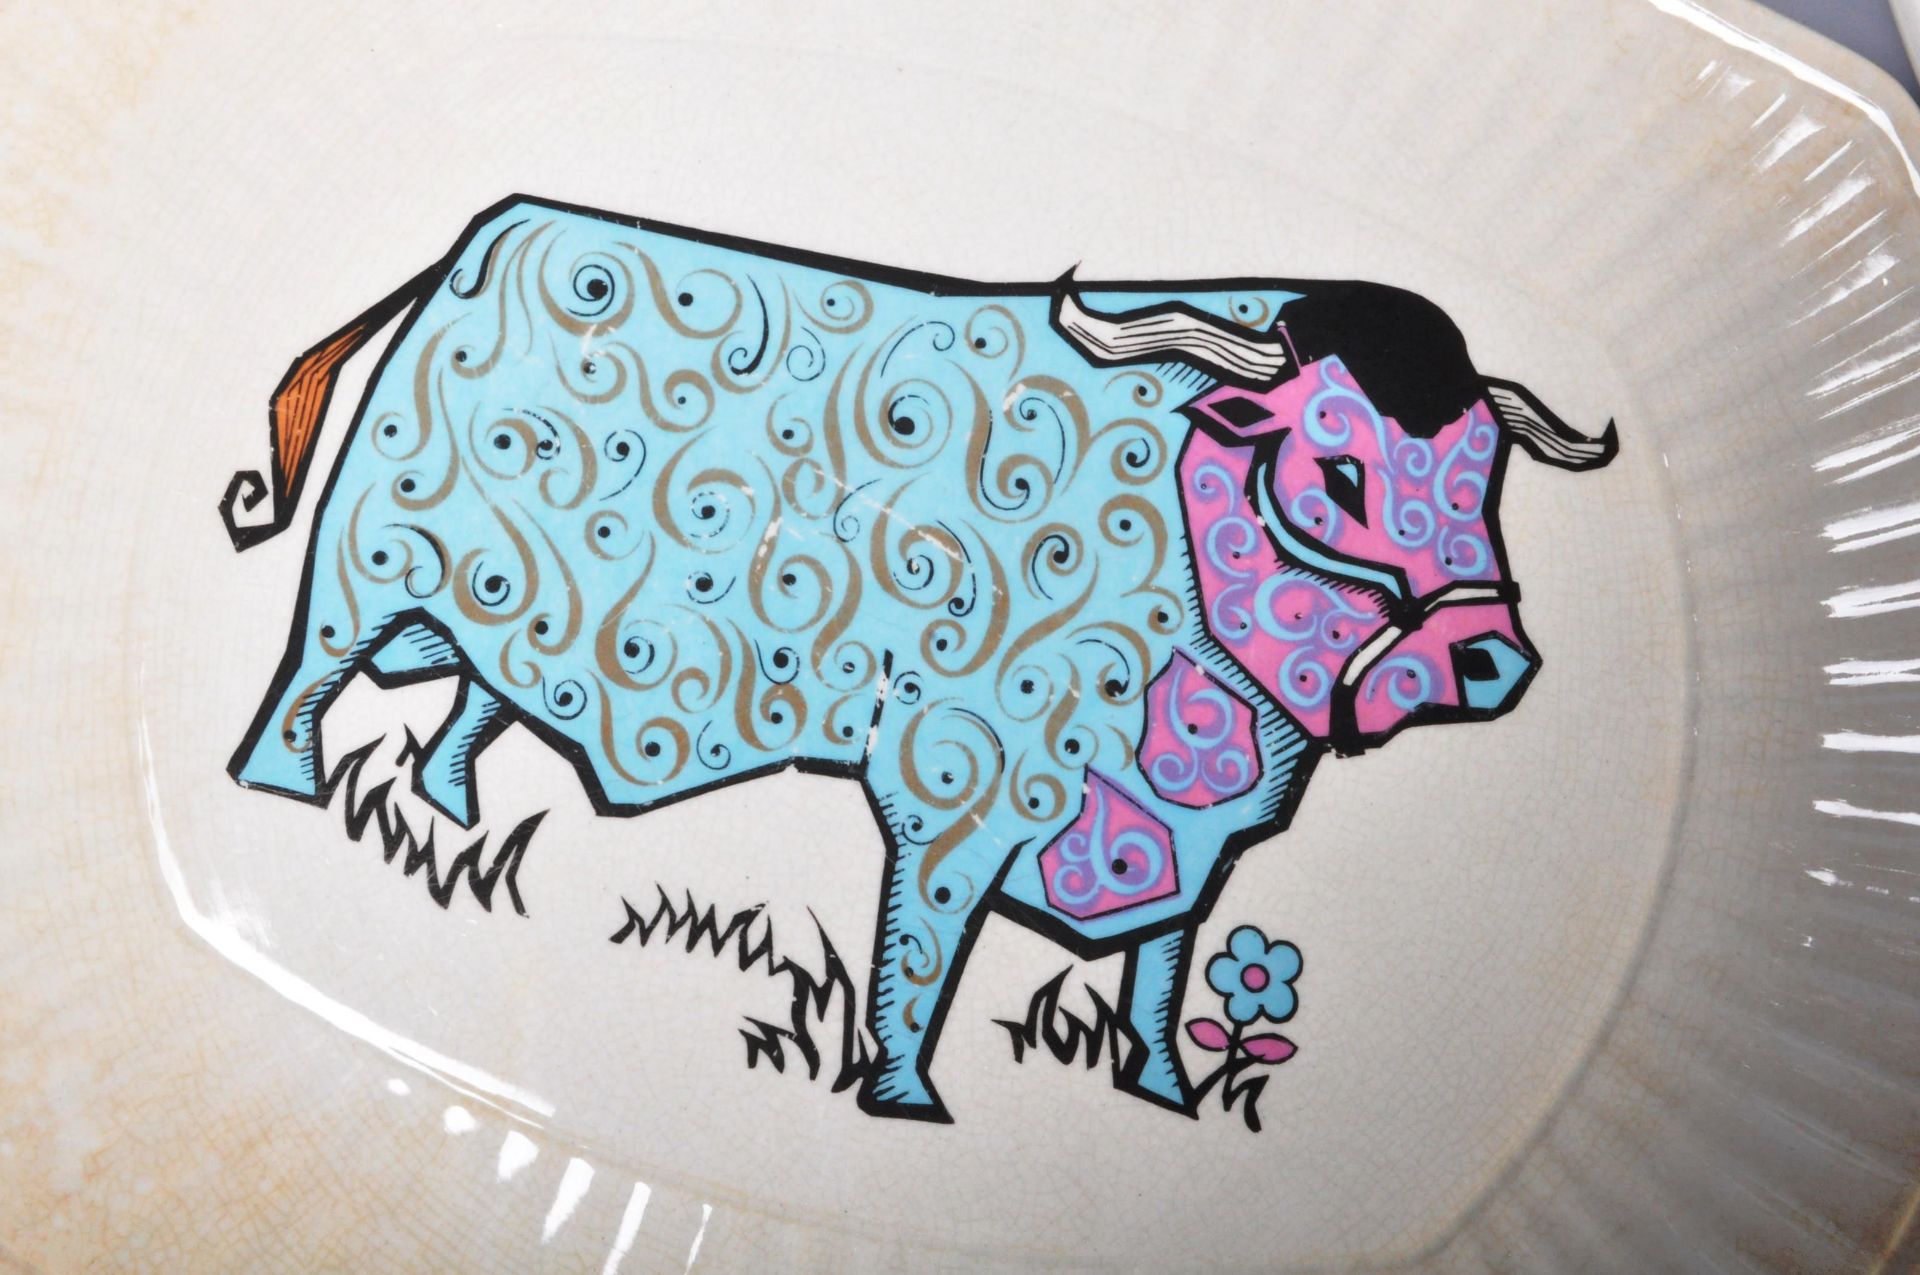 SET OF 1970'S PSYCHEDELIC BEEFEATER COW PLATES - Image 3 of 8